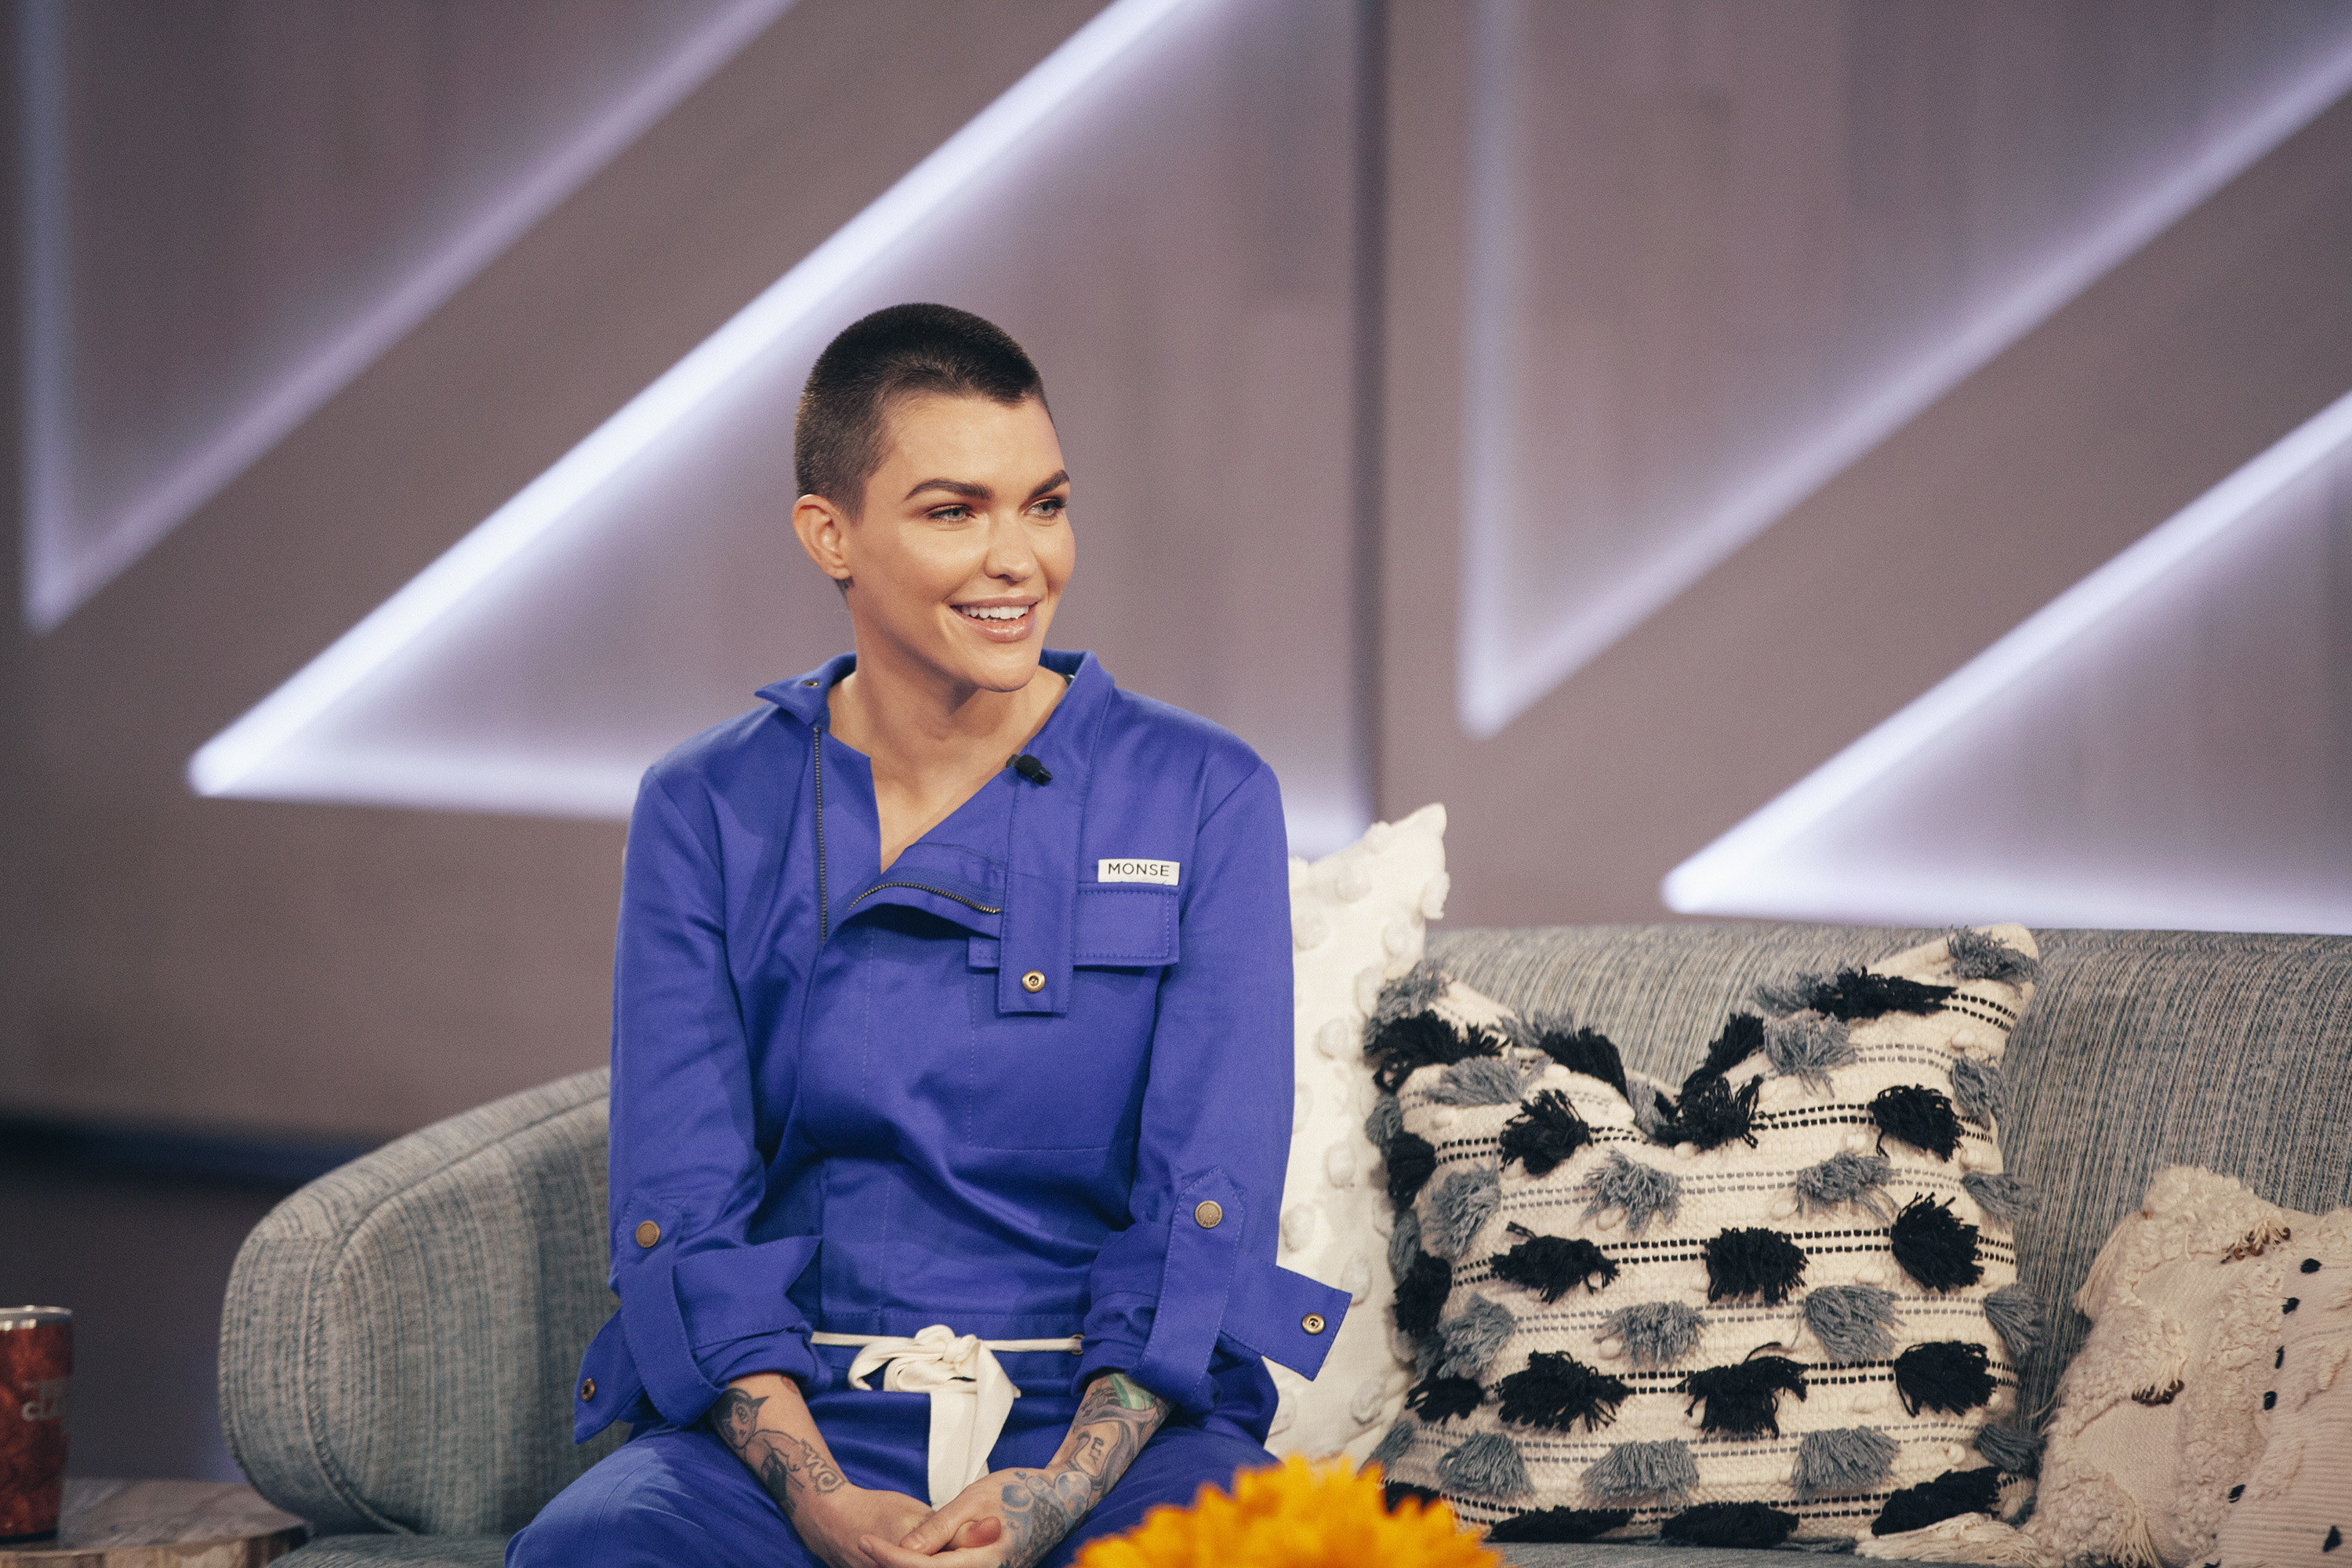 Ruby Rose at a talk show